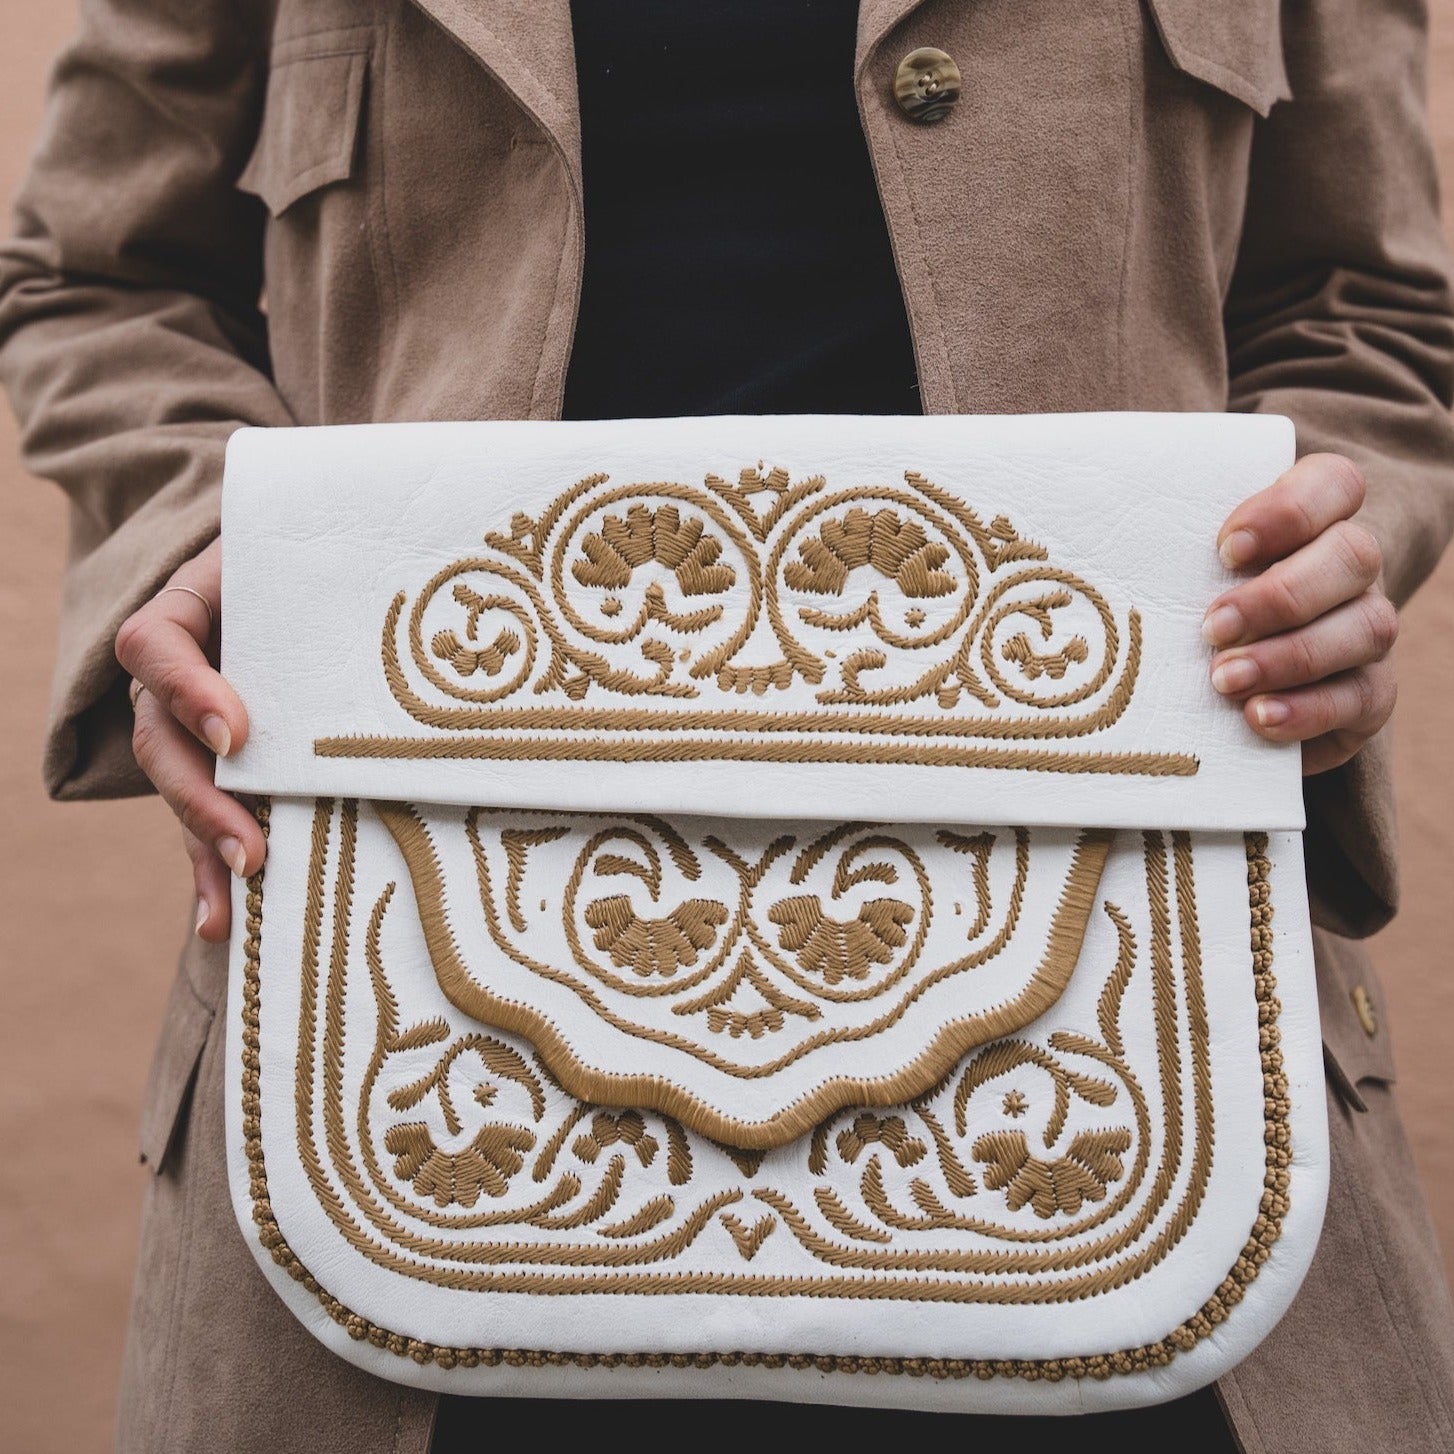 White and Tan Embroidered Leather Bag by AMASOUK